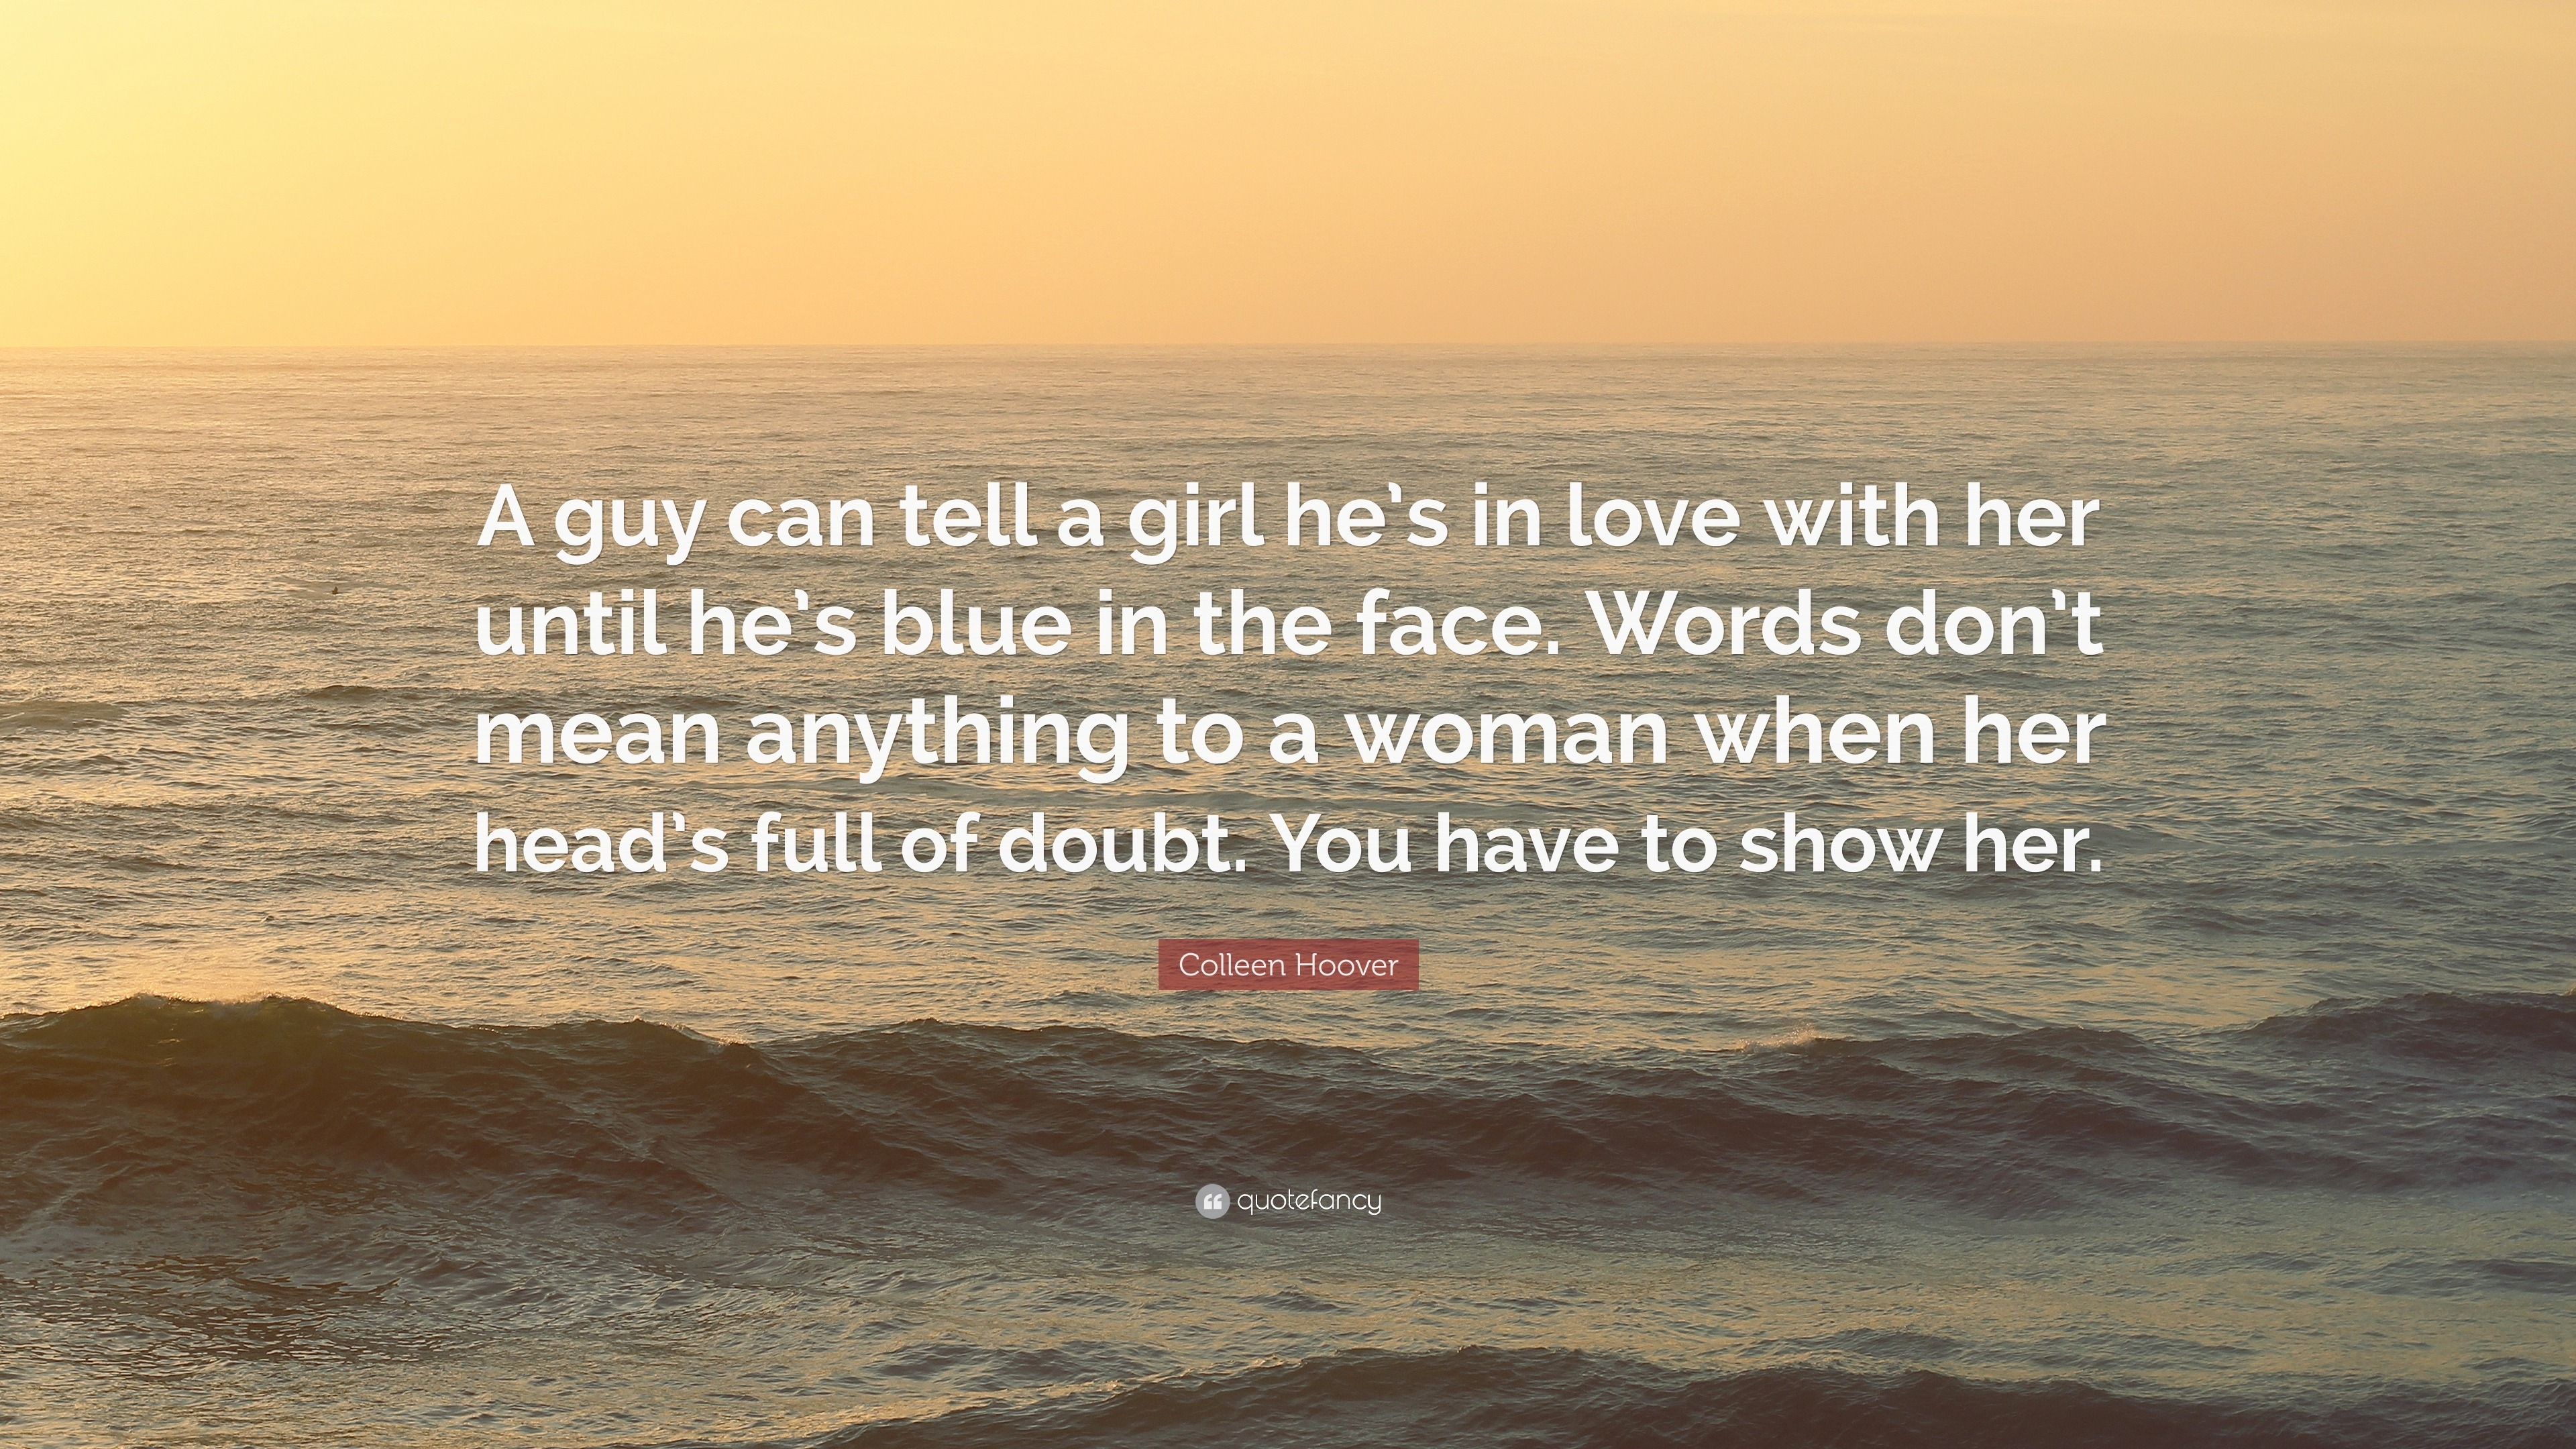 Colleen Hoover Quote “A guy can tell a girl he s in love with her